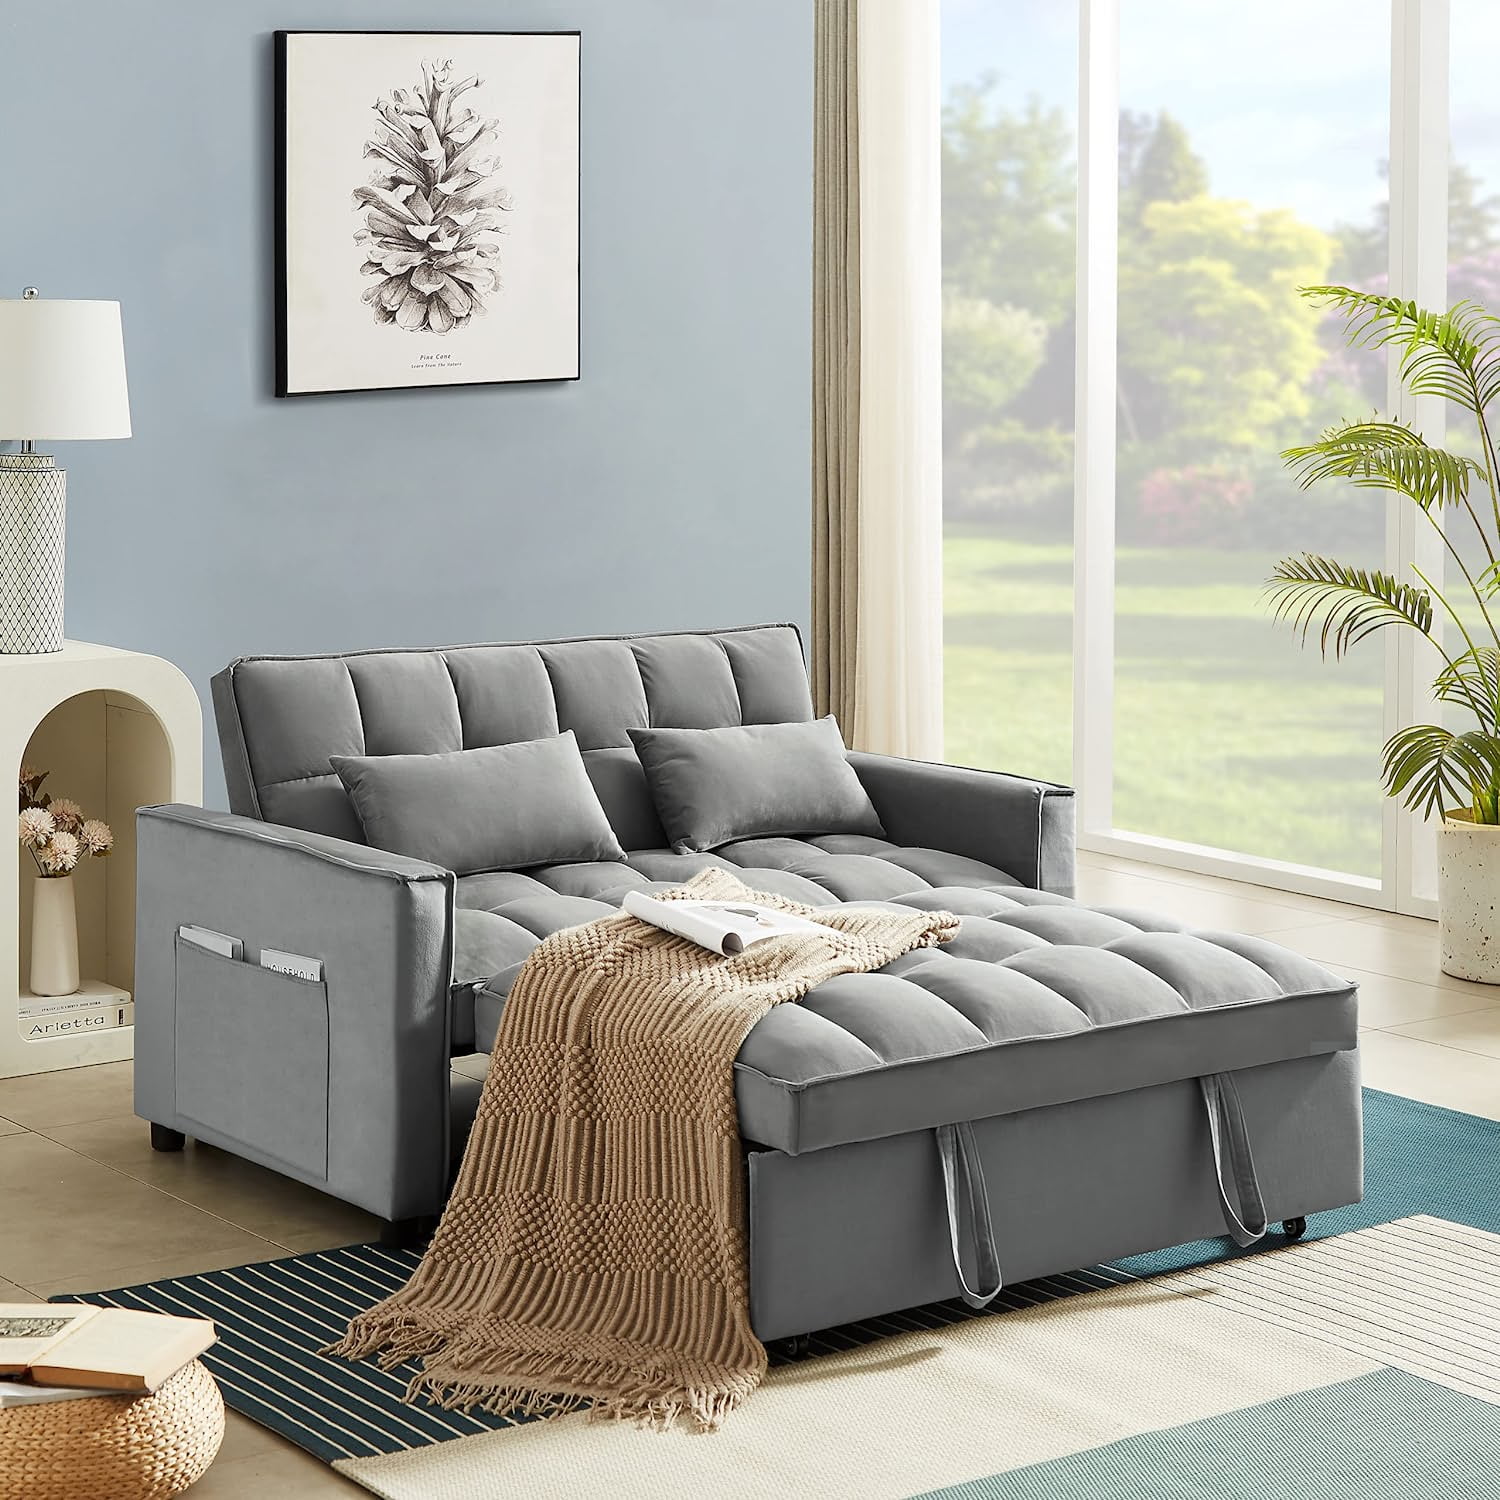 Muumblus 55″ Convertible Sleeper Loveseat with Pull Out Bed